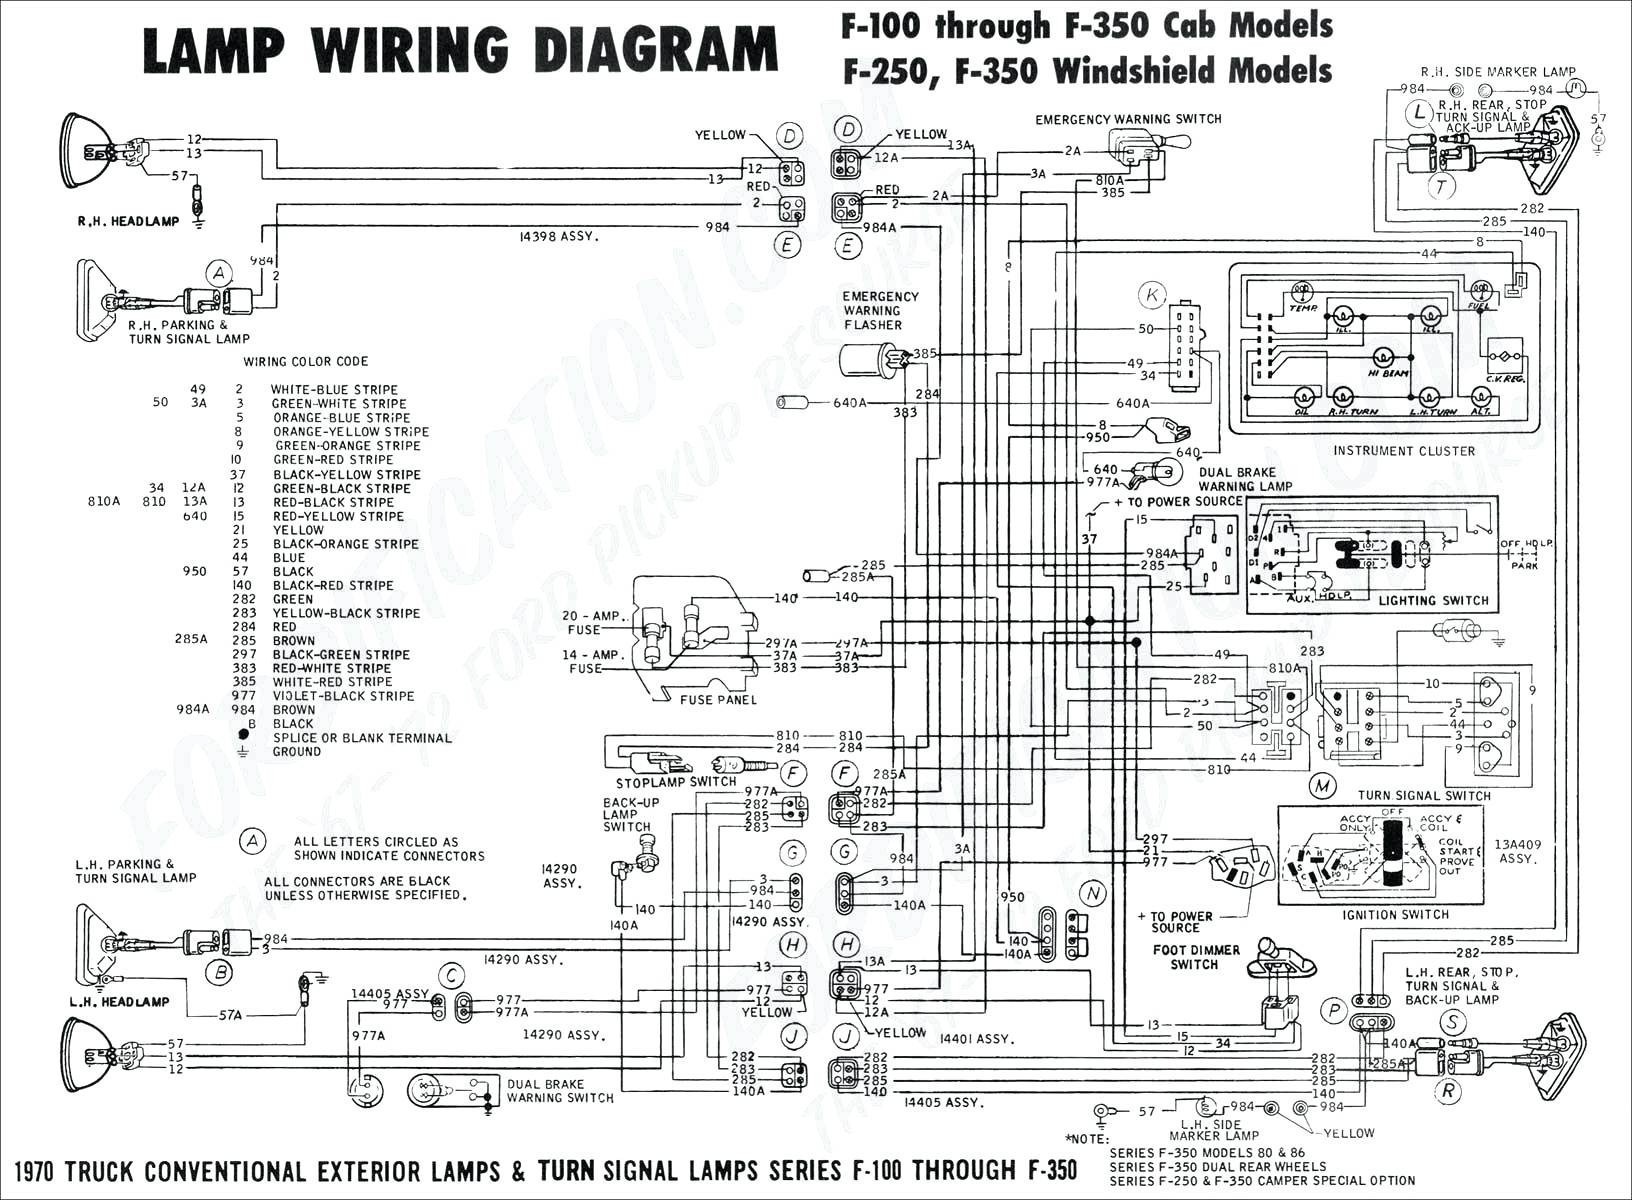 Basic Car Stereo Wiring Diagram 98 Chevy 1500 Stereo Wiring Diagram Of Basic Car Stereo Wiring Diagram